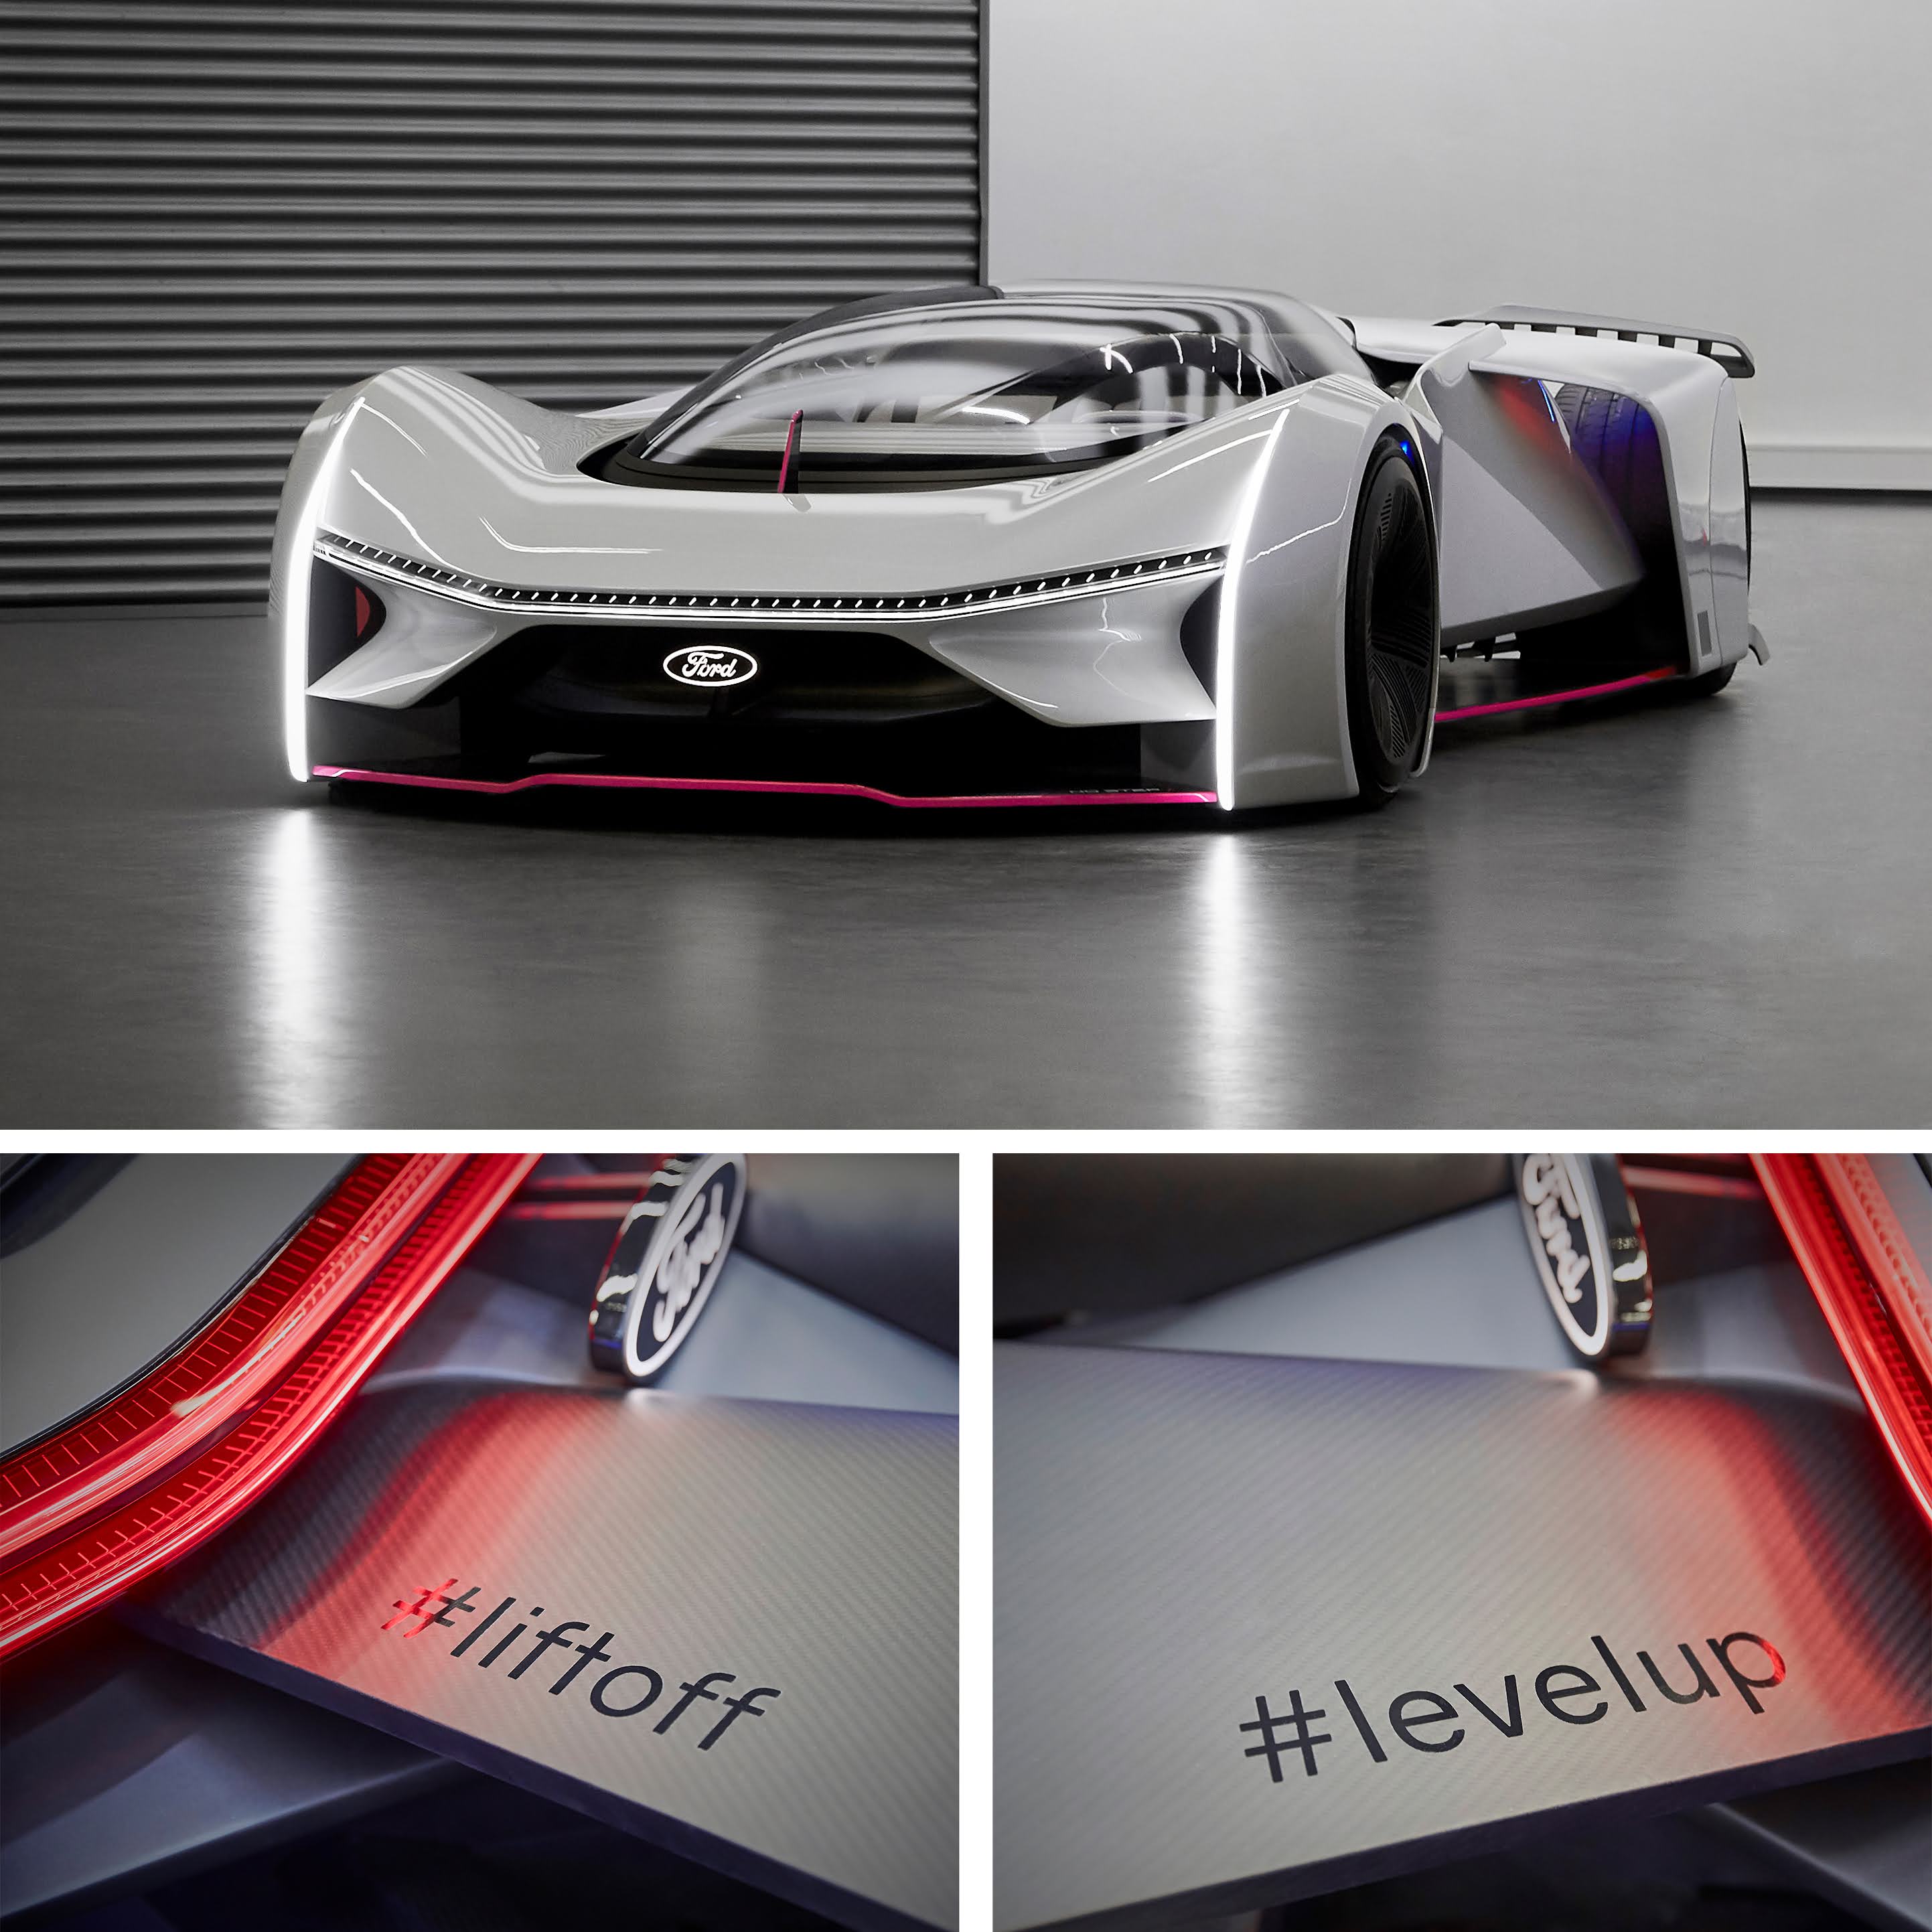 Team Fordzilla P1 Virtual Race Car Launches Into The Real World